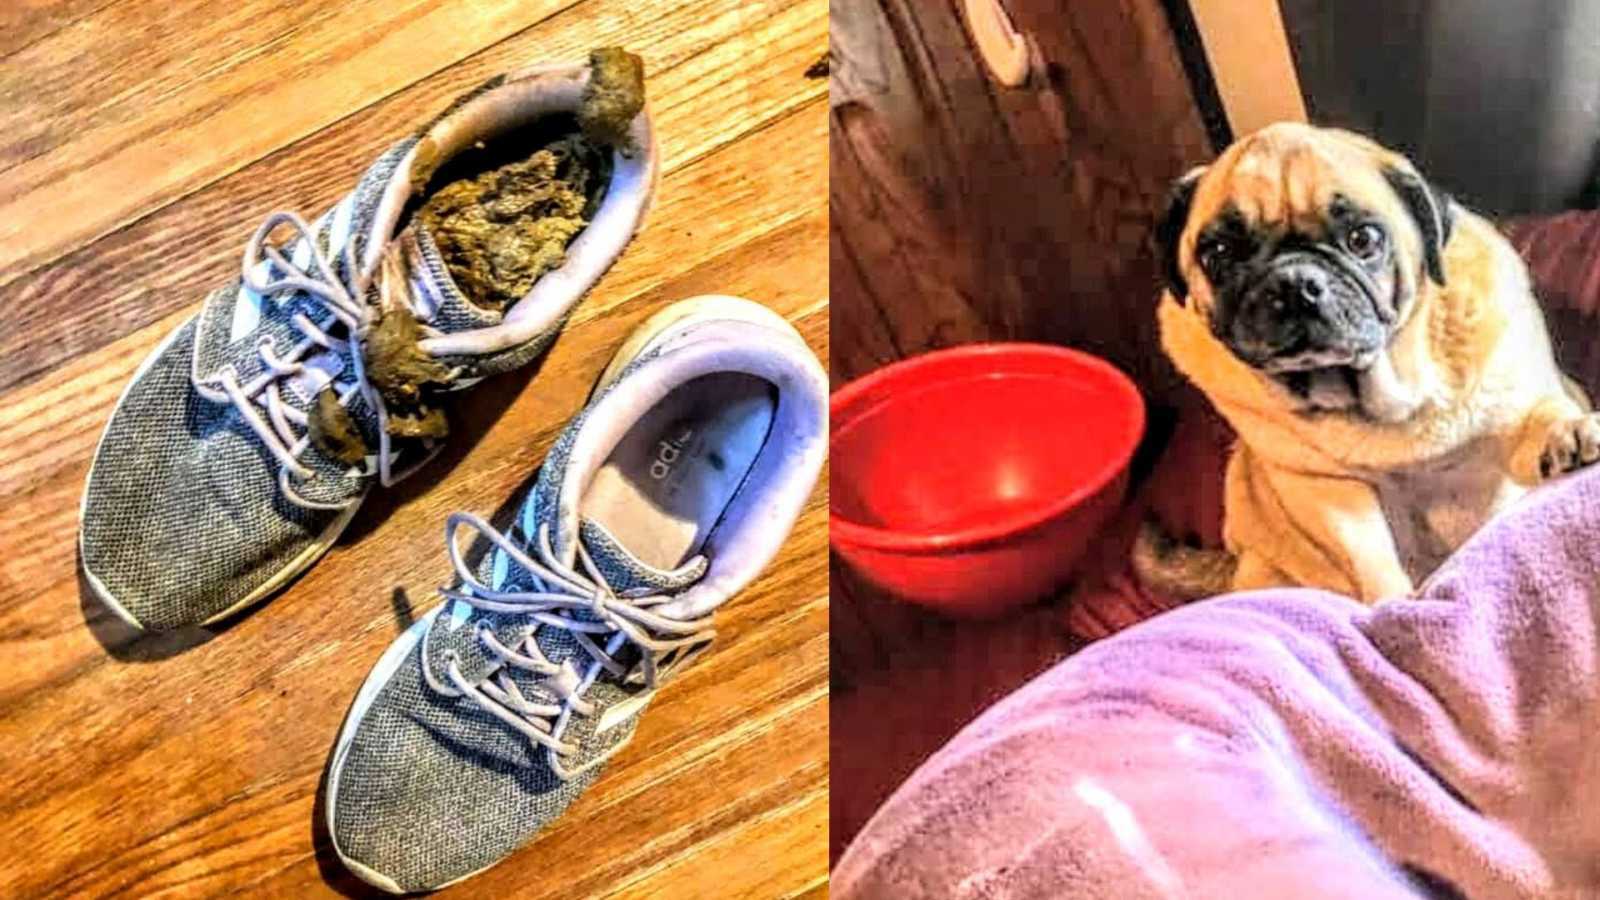 dog next to show with dog poop in it